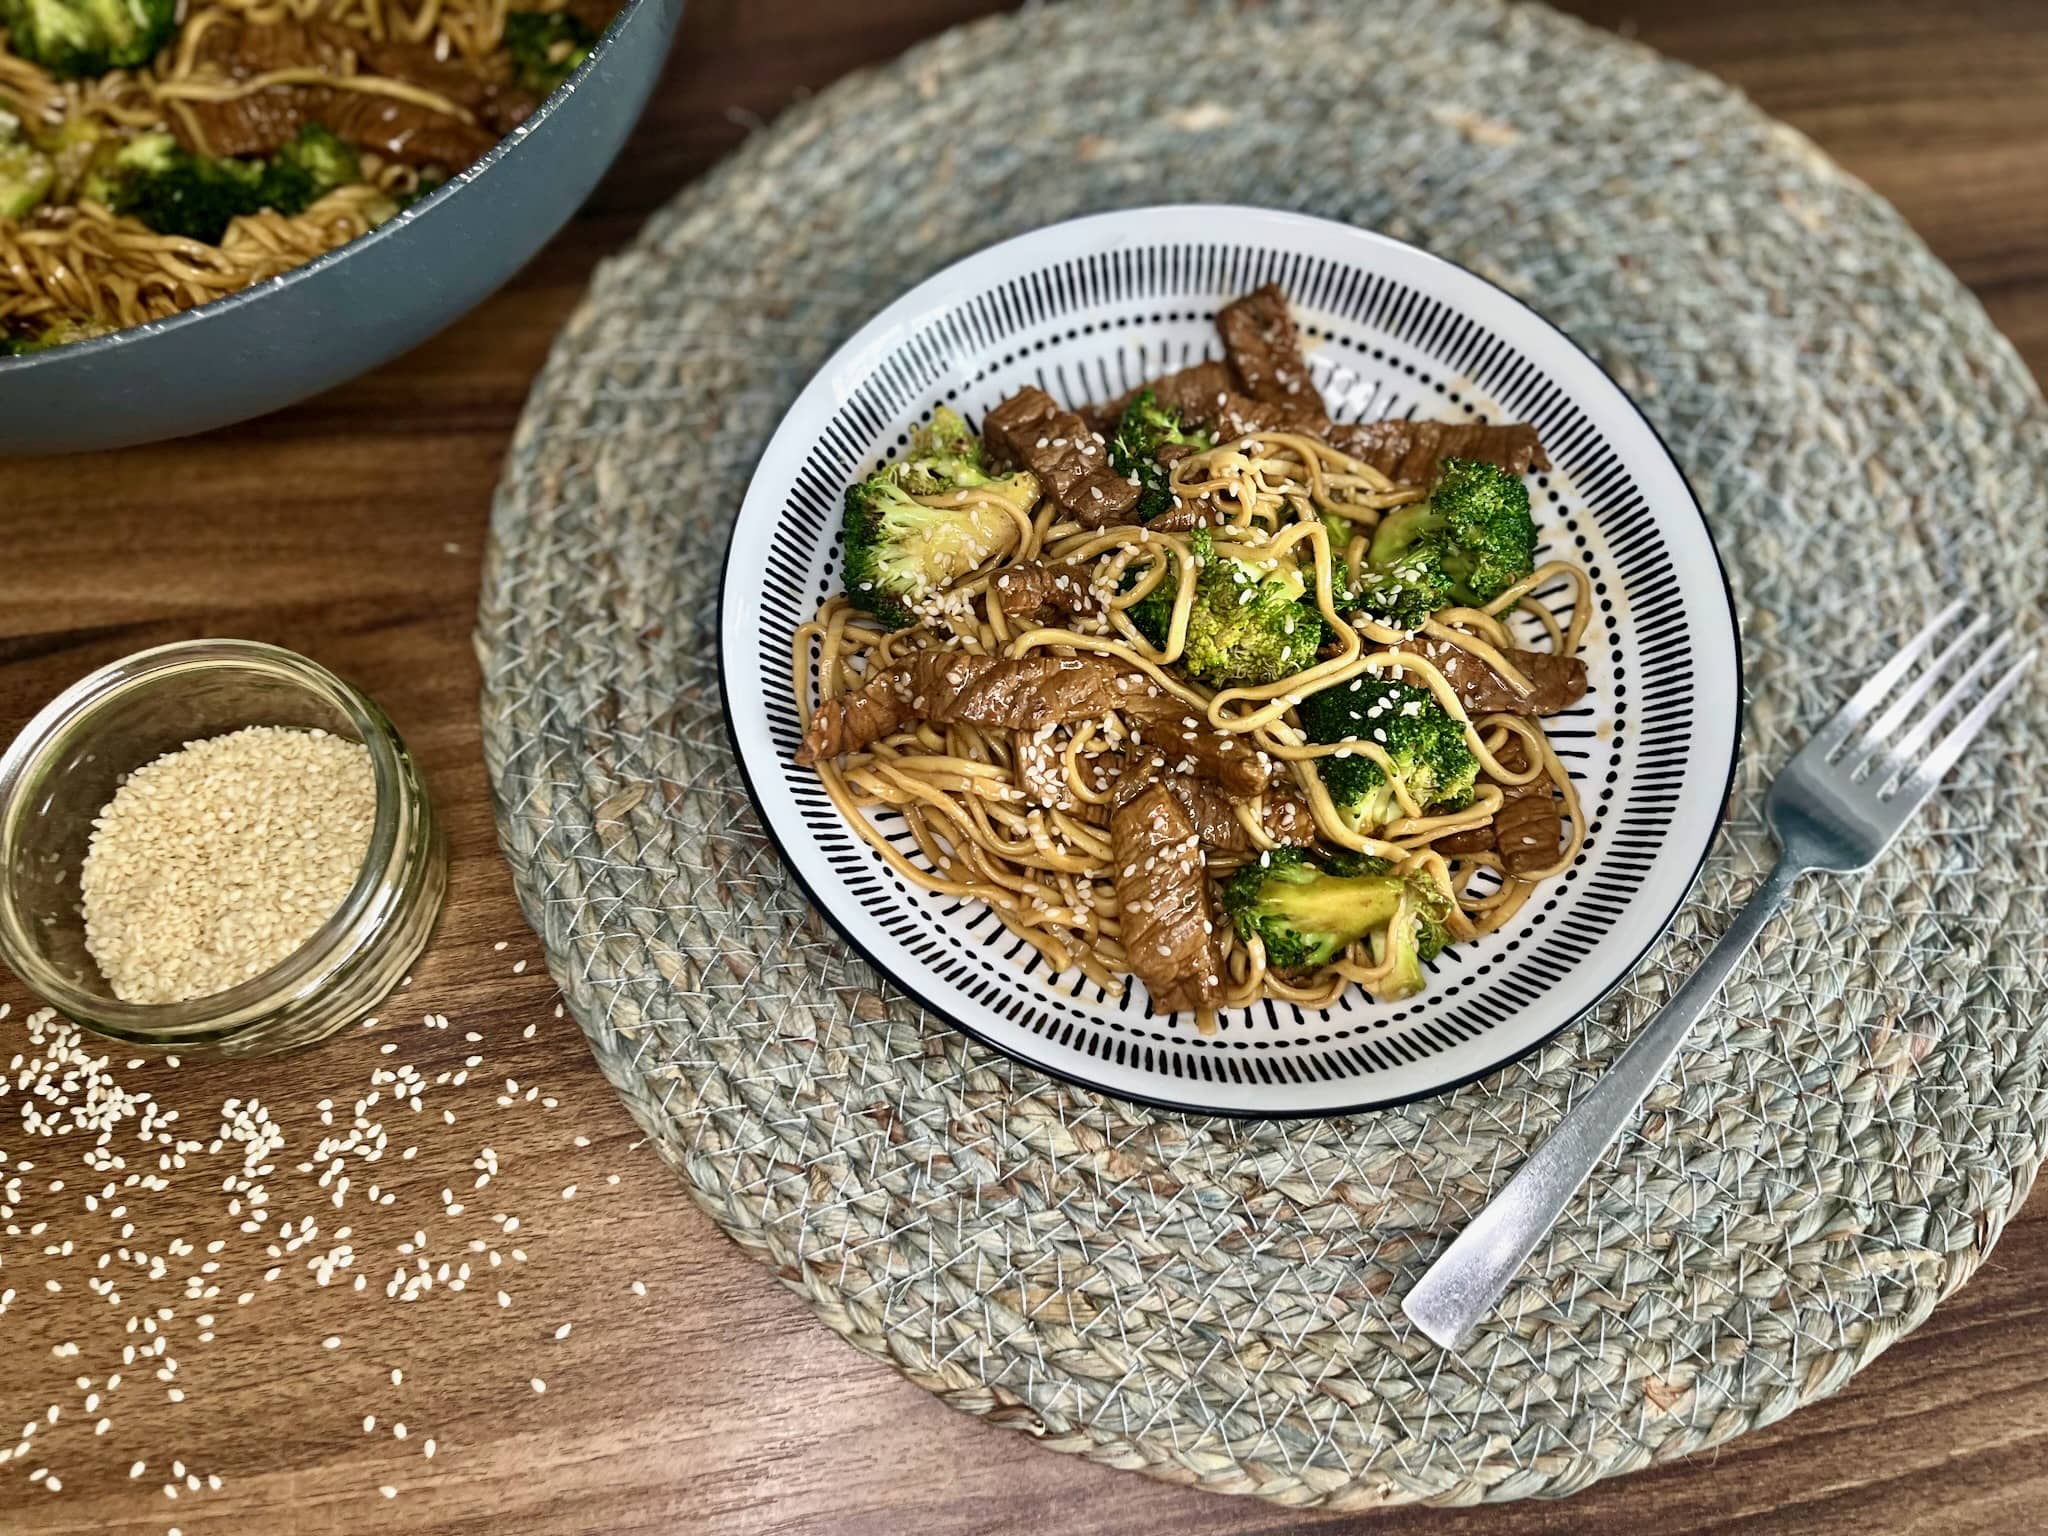 A portion of beef and broccoli with egg noodles in a bowl